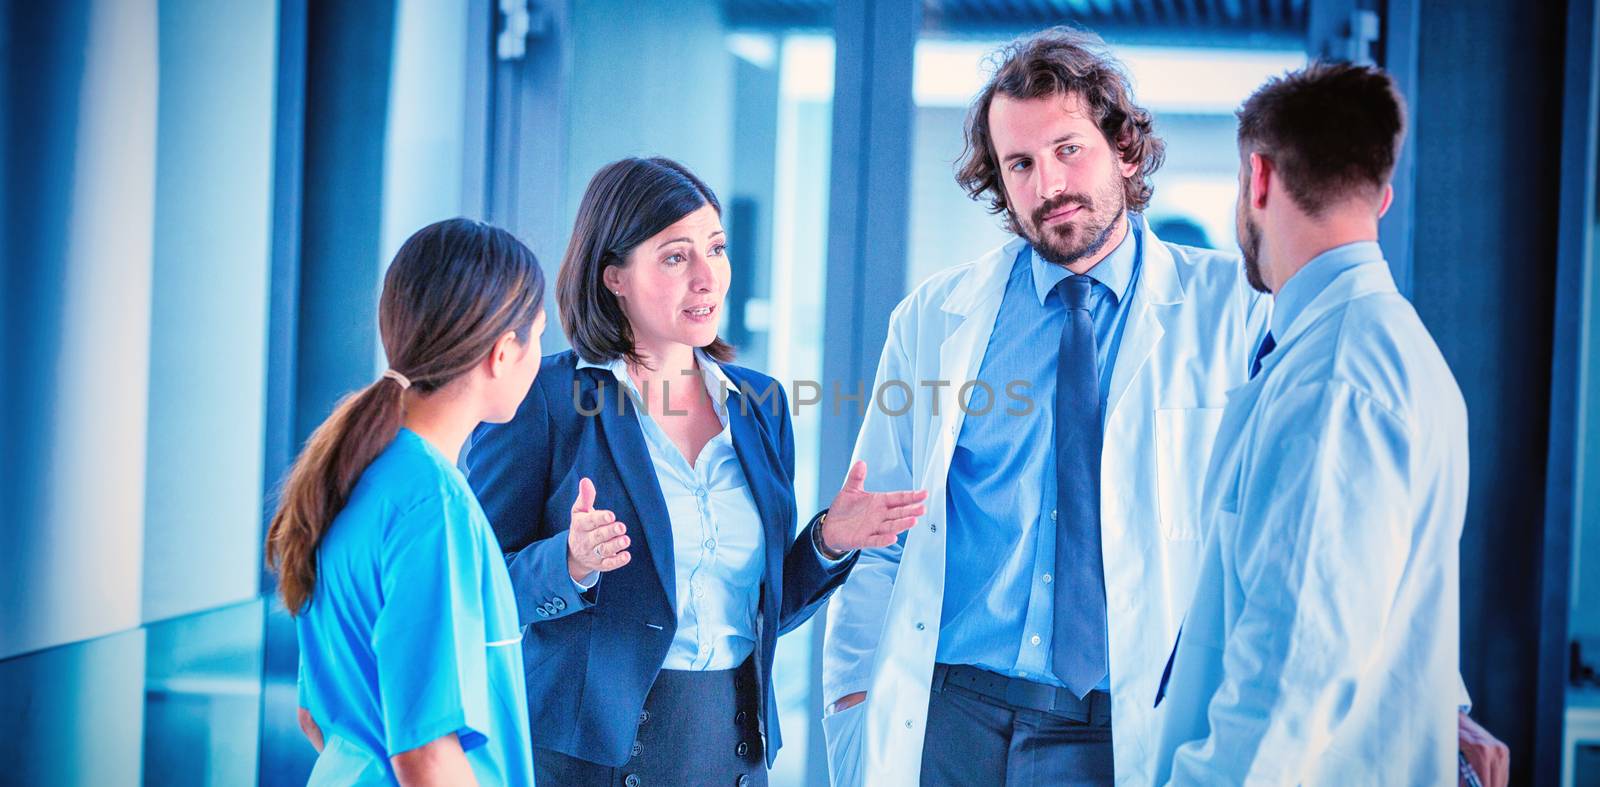 Businesswoman talking with doctors in hospital